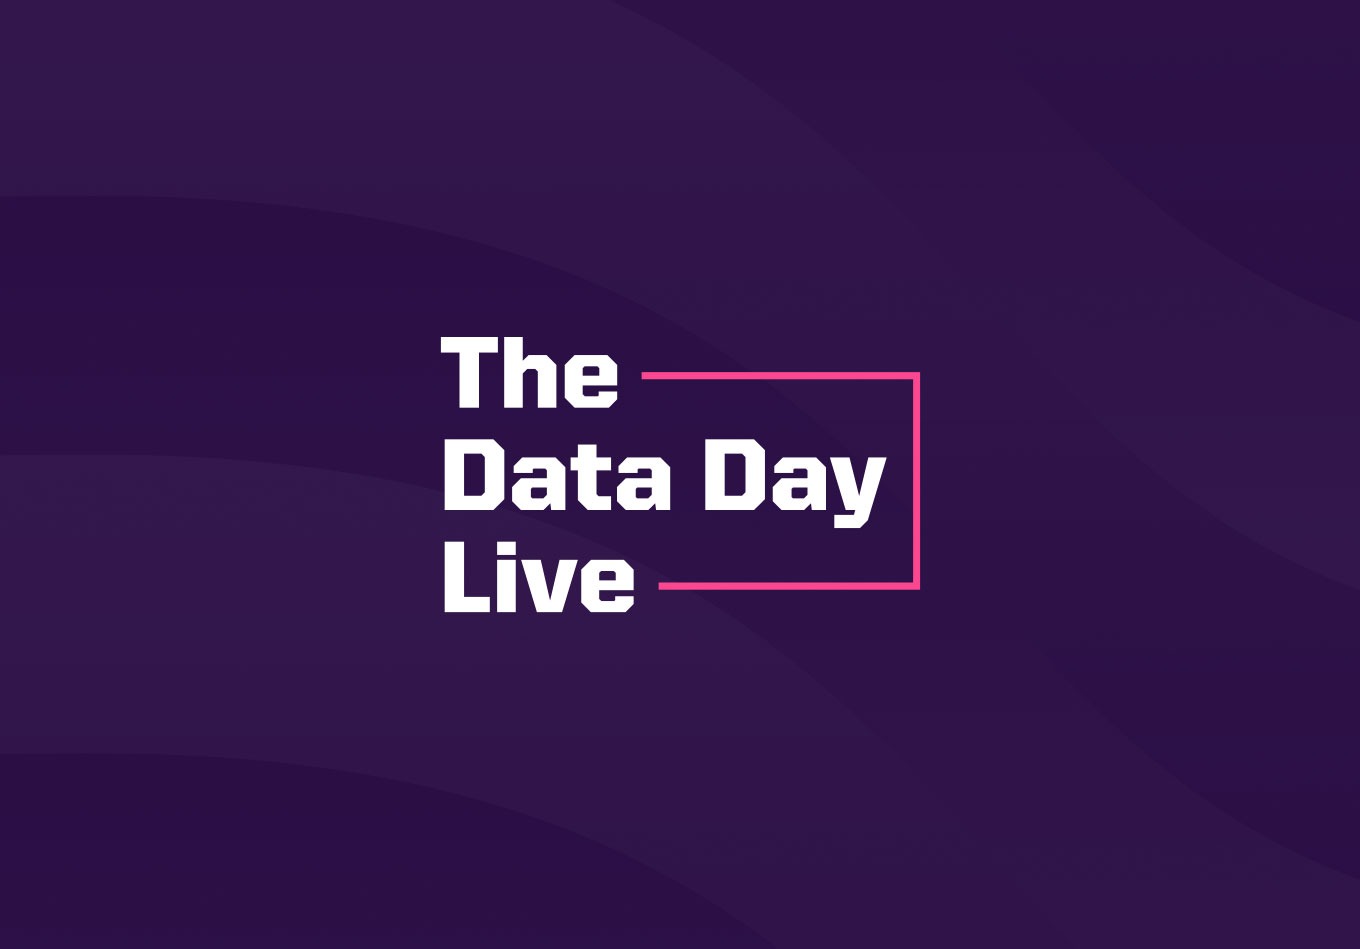 Premier League Matchday 1 Preview │ The Data Day Live │ August 5